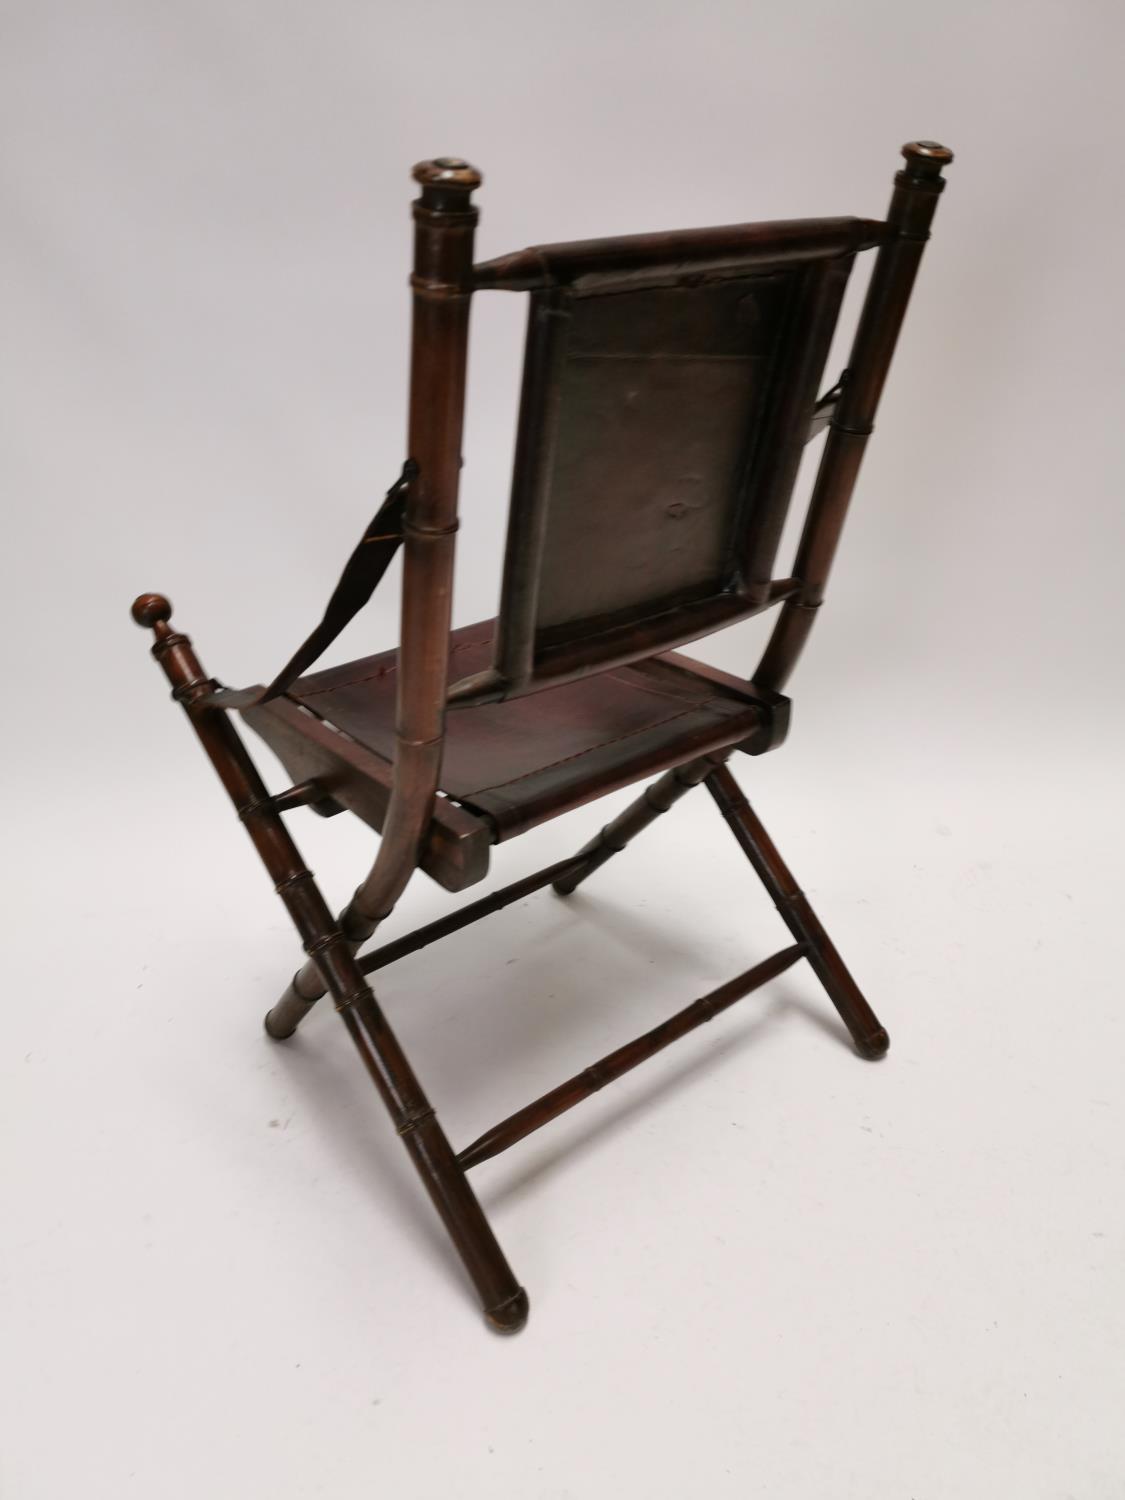 Unsual mahogany and leather folding chair {92 cm H x 50 cm W x 55 cm D}. - Image 3 of 3